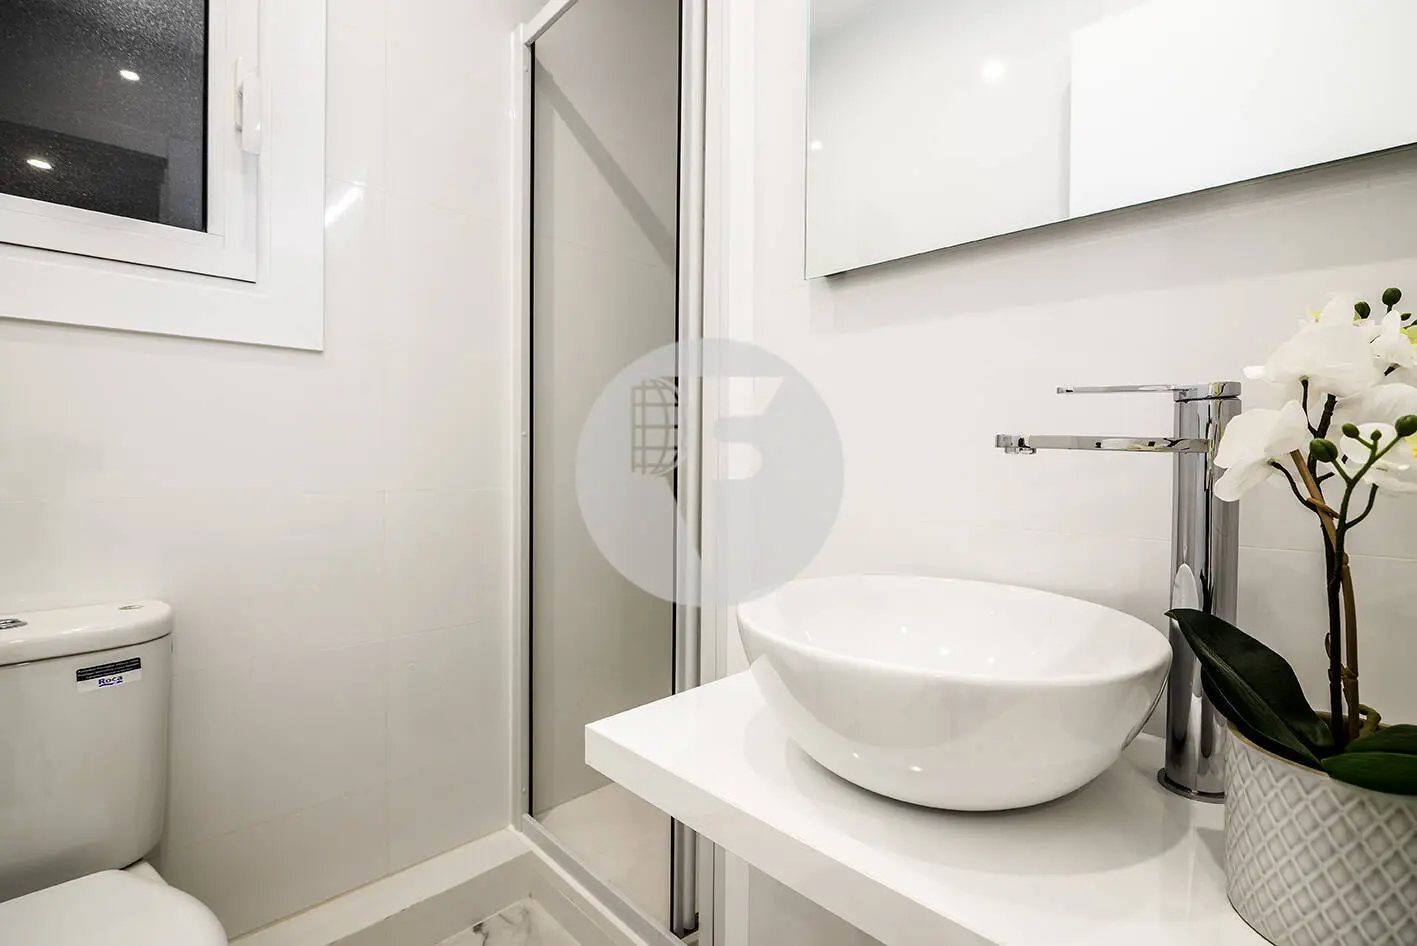 Brand new completely renovated apartment on Aragó street in the heart of El Clot in Barcelona. 25